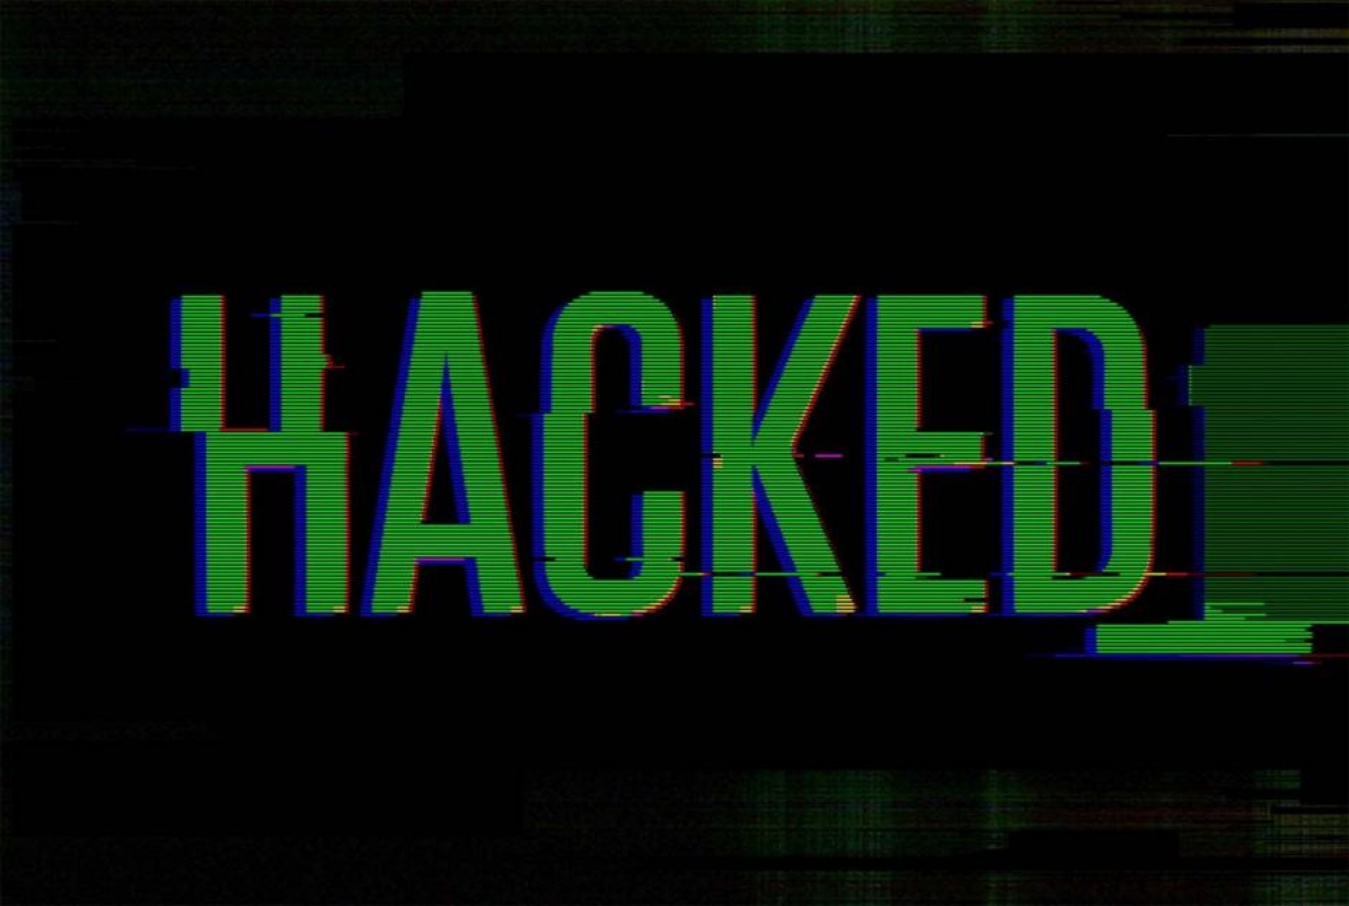 6500 sites down after hackers wipe out database of dark web hosting firm